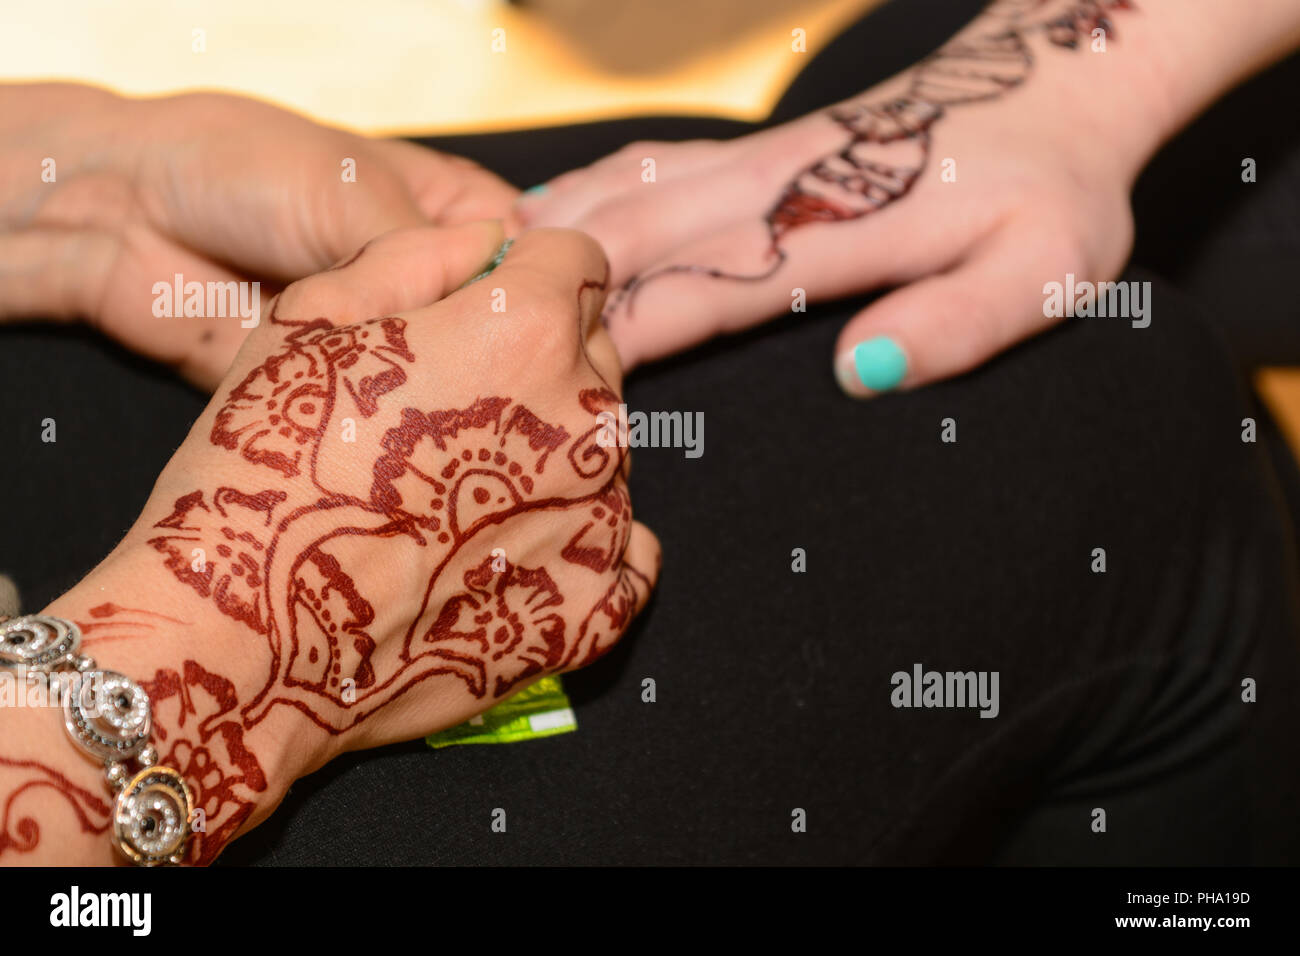 Close-up of henna tattoo on the arm of a person Stock Photo